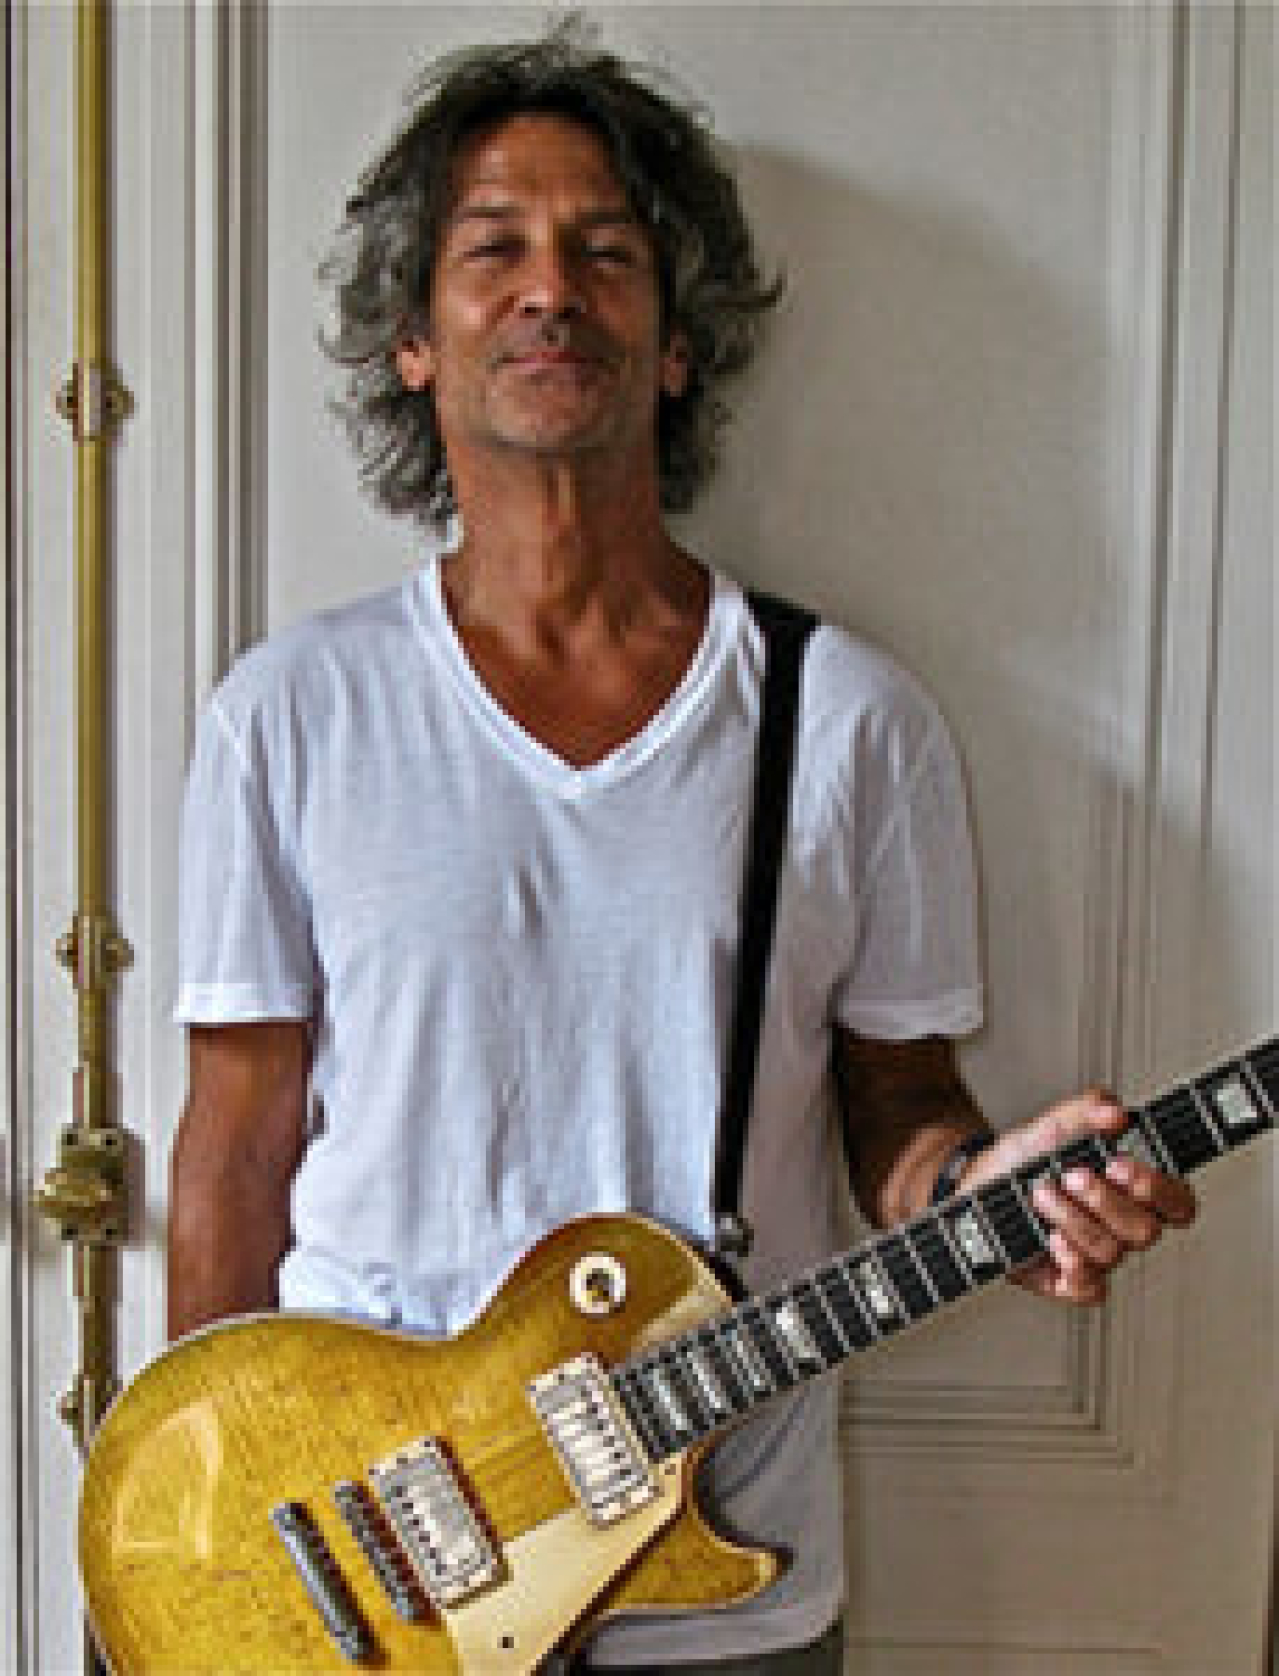 guild hall and taylor barton present ge smiths portraits with billy squier logo 68078